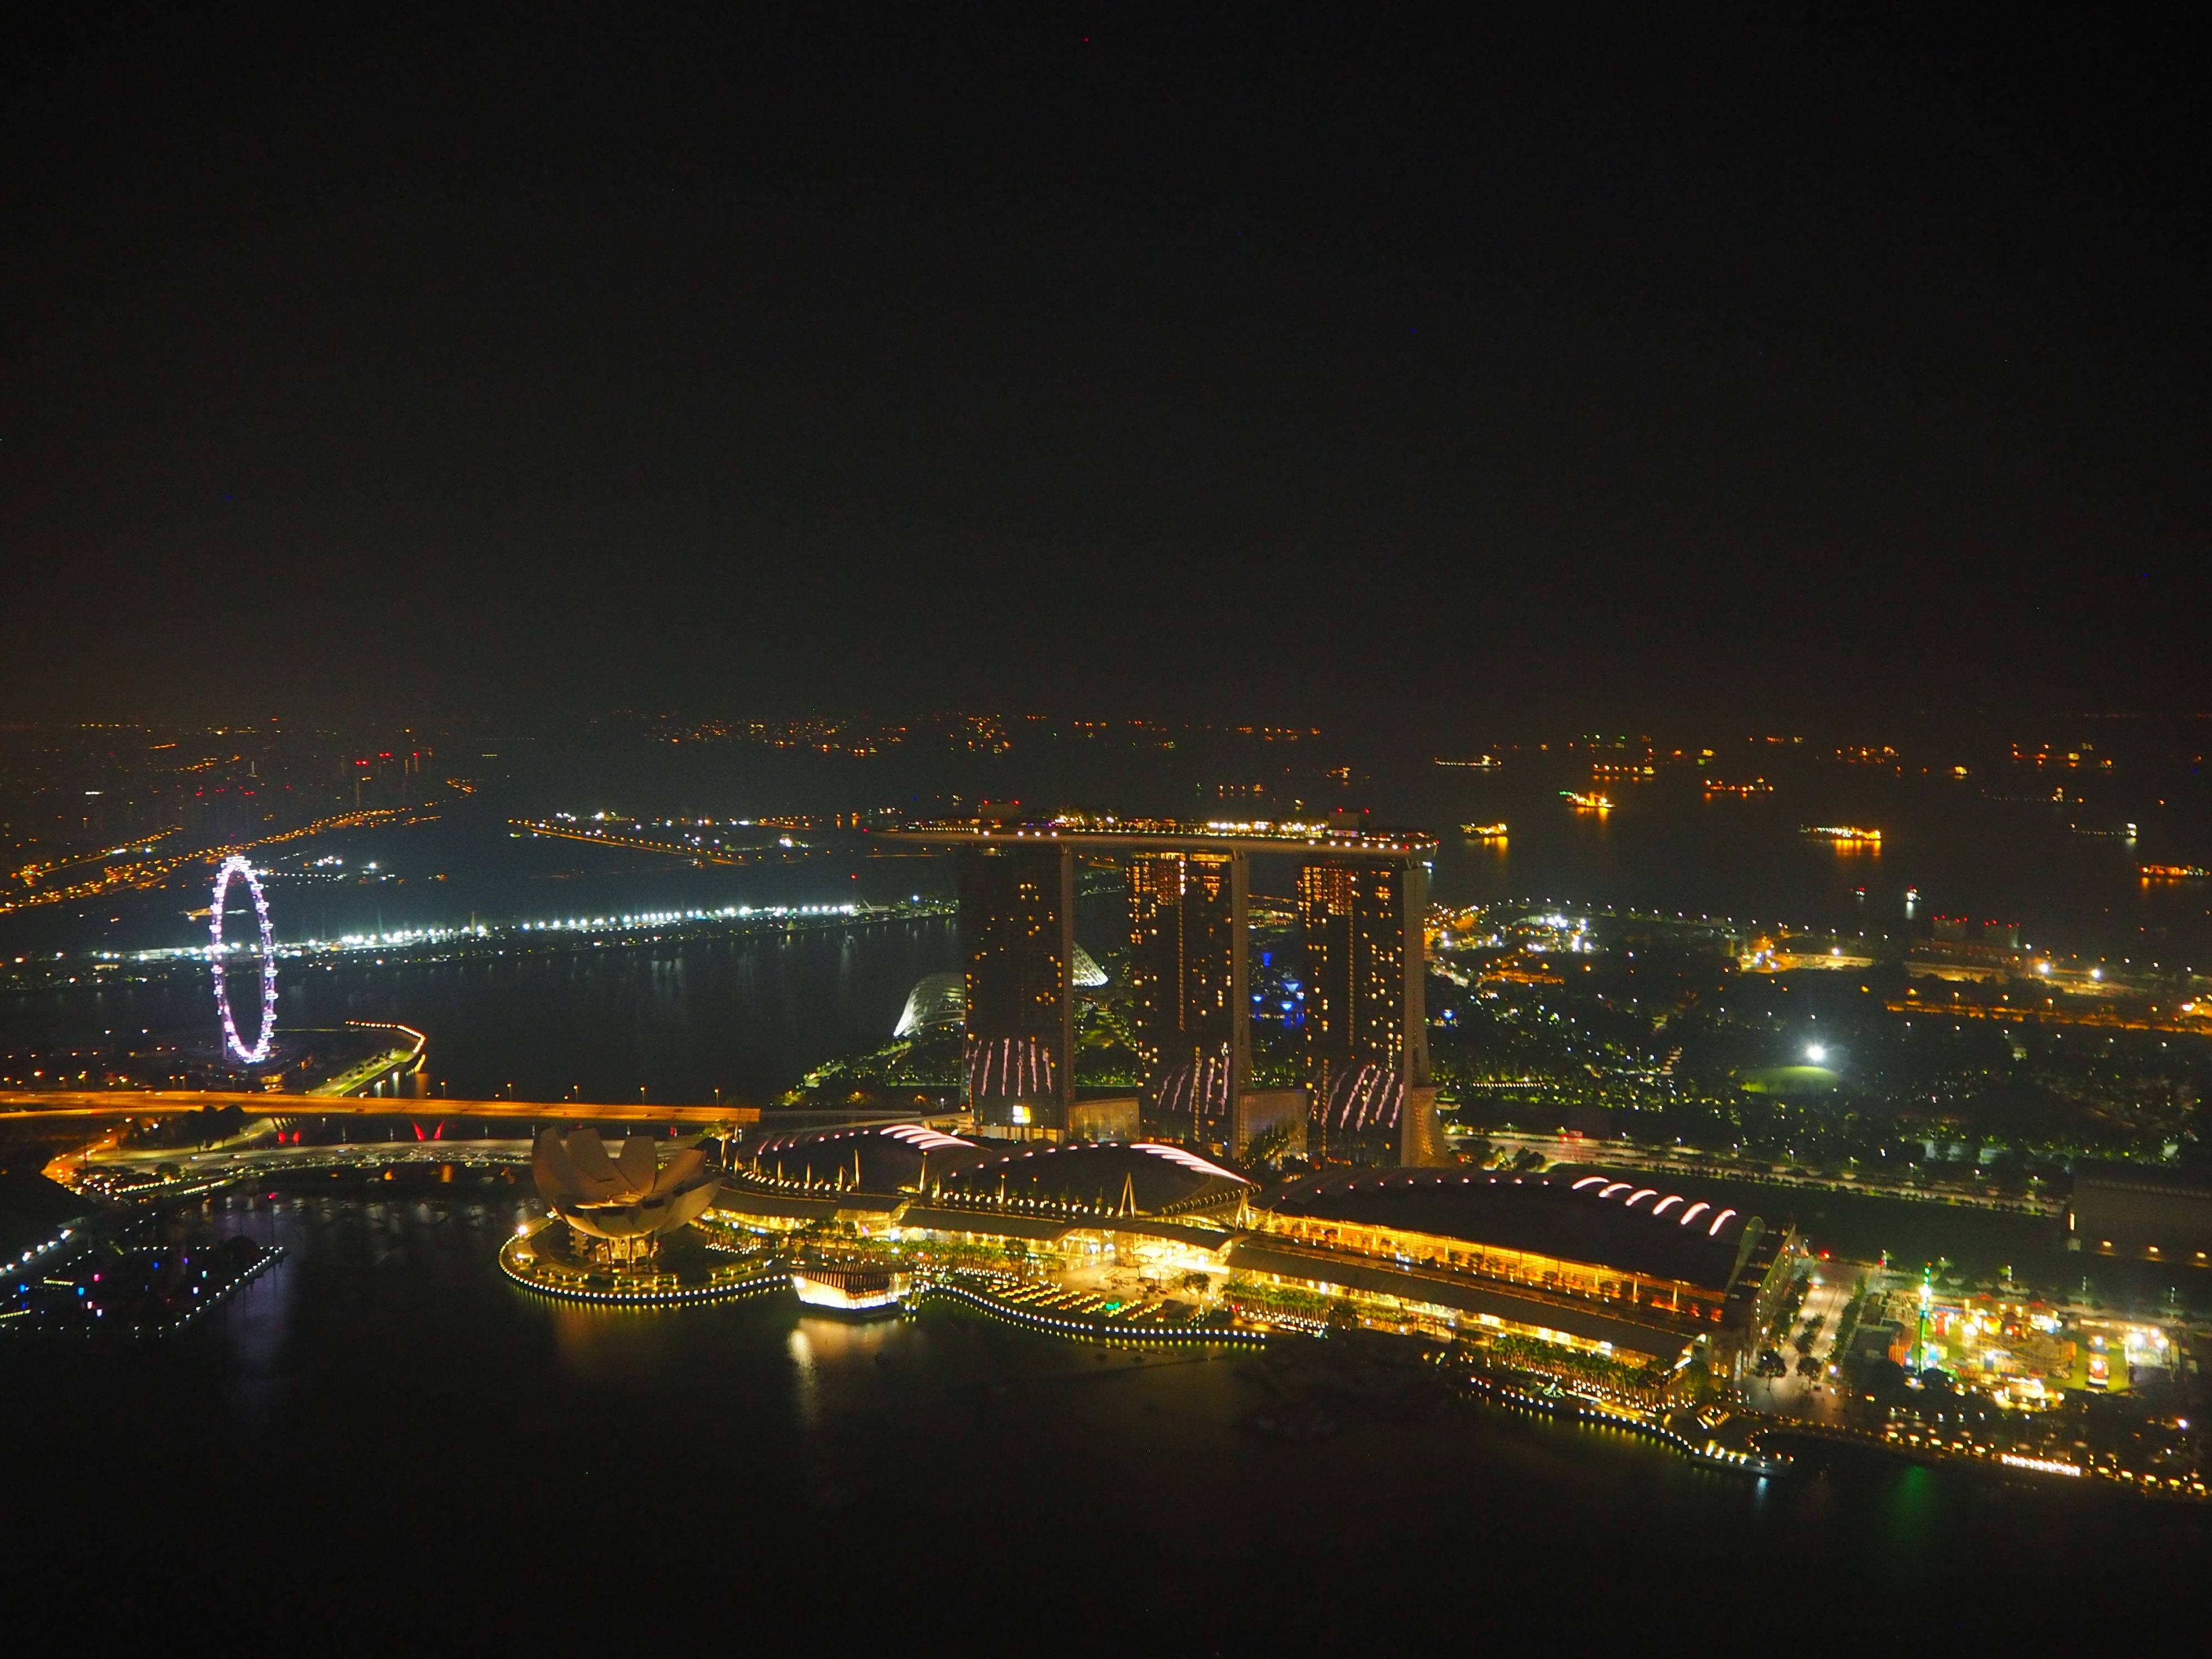 Singapore seen from above